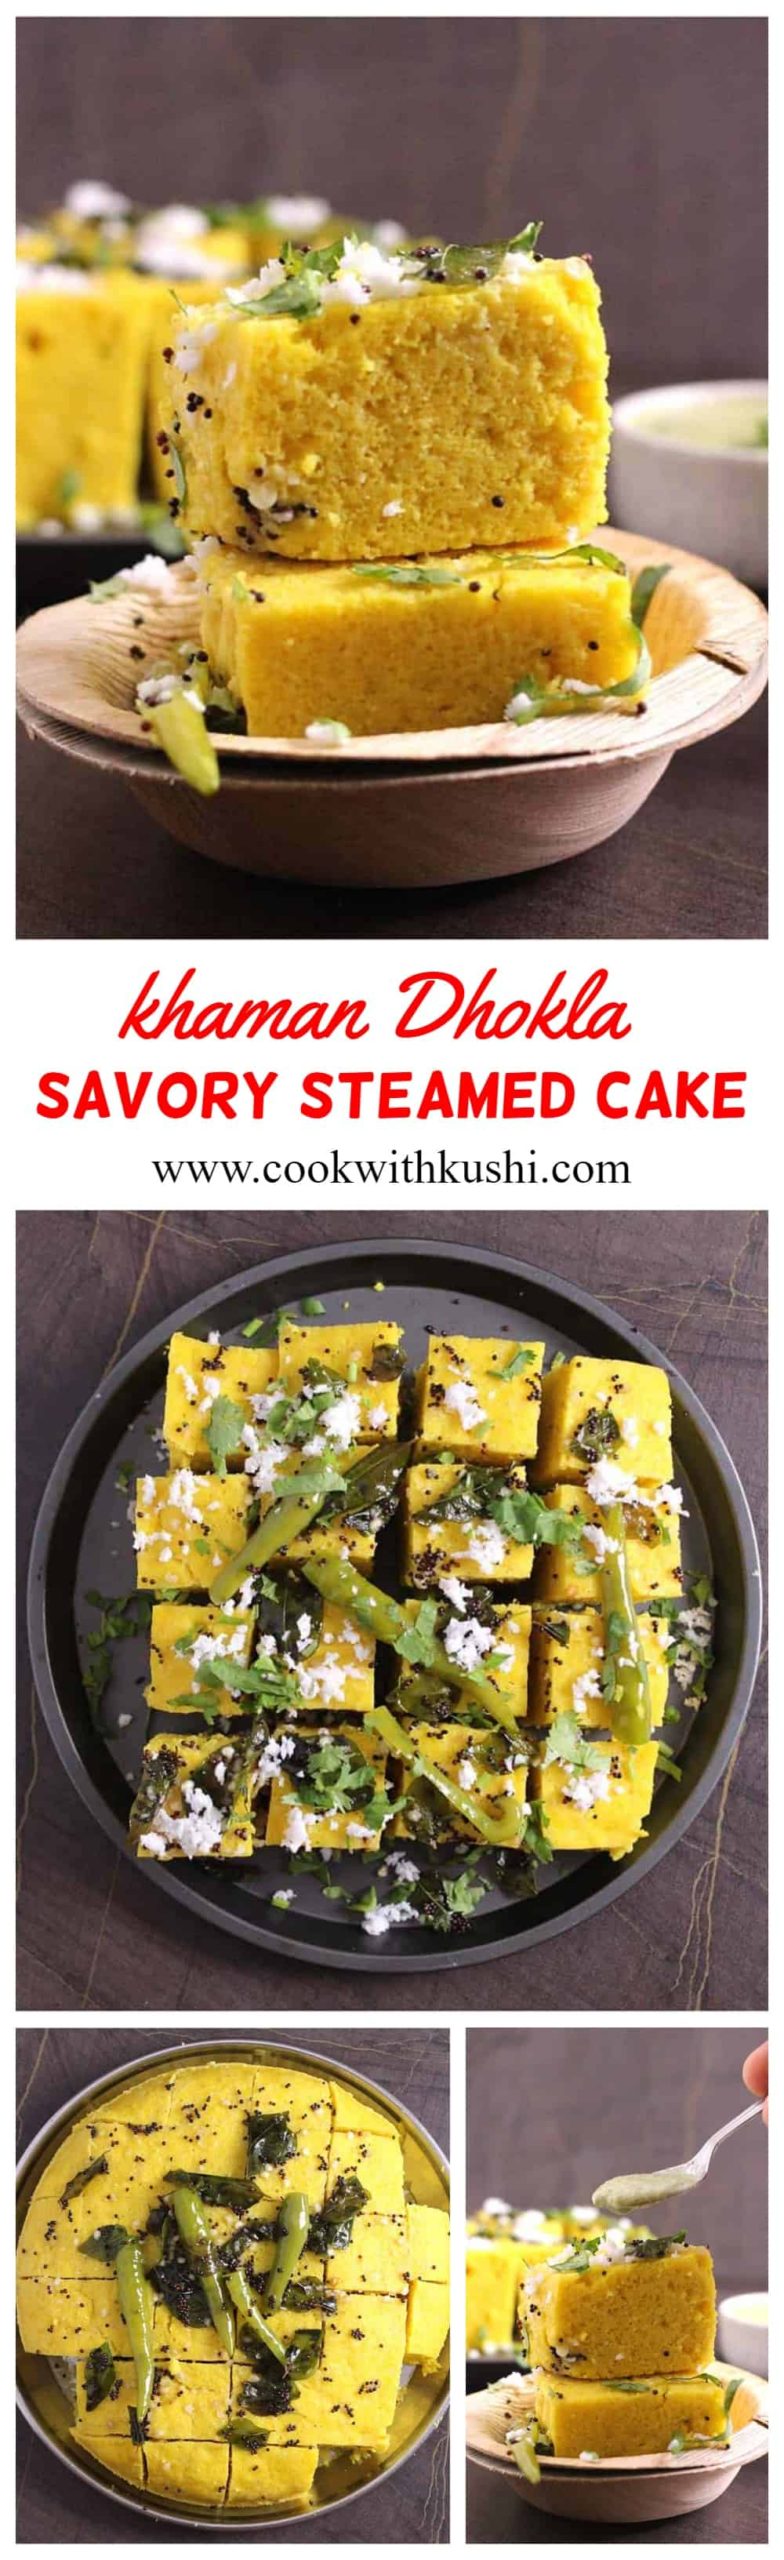 Dhokla or Khaman Dhokla is a soft and spongy,  instant steamed dish made using gram flour or chickpea flour (besan) and few spices. Dhokla is popular recipe from Gujarat, India that can be served for breakfast, snack, main coarse or side dish for lunch or dinner - yes it can be served for any meal :-) #dhokla #indianfood #instantpot #lunch #dinner #brunch #breakfast #streetfood #snack #sidedish #vegetarianmeal